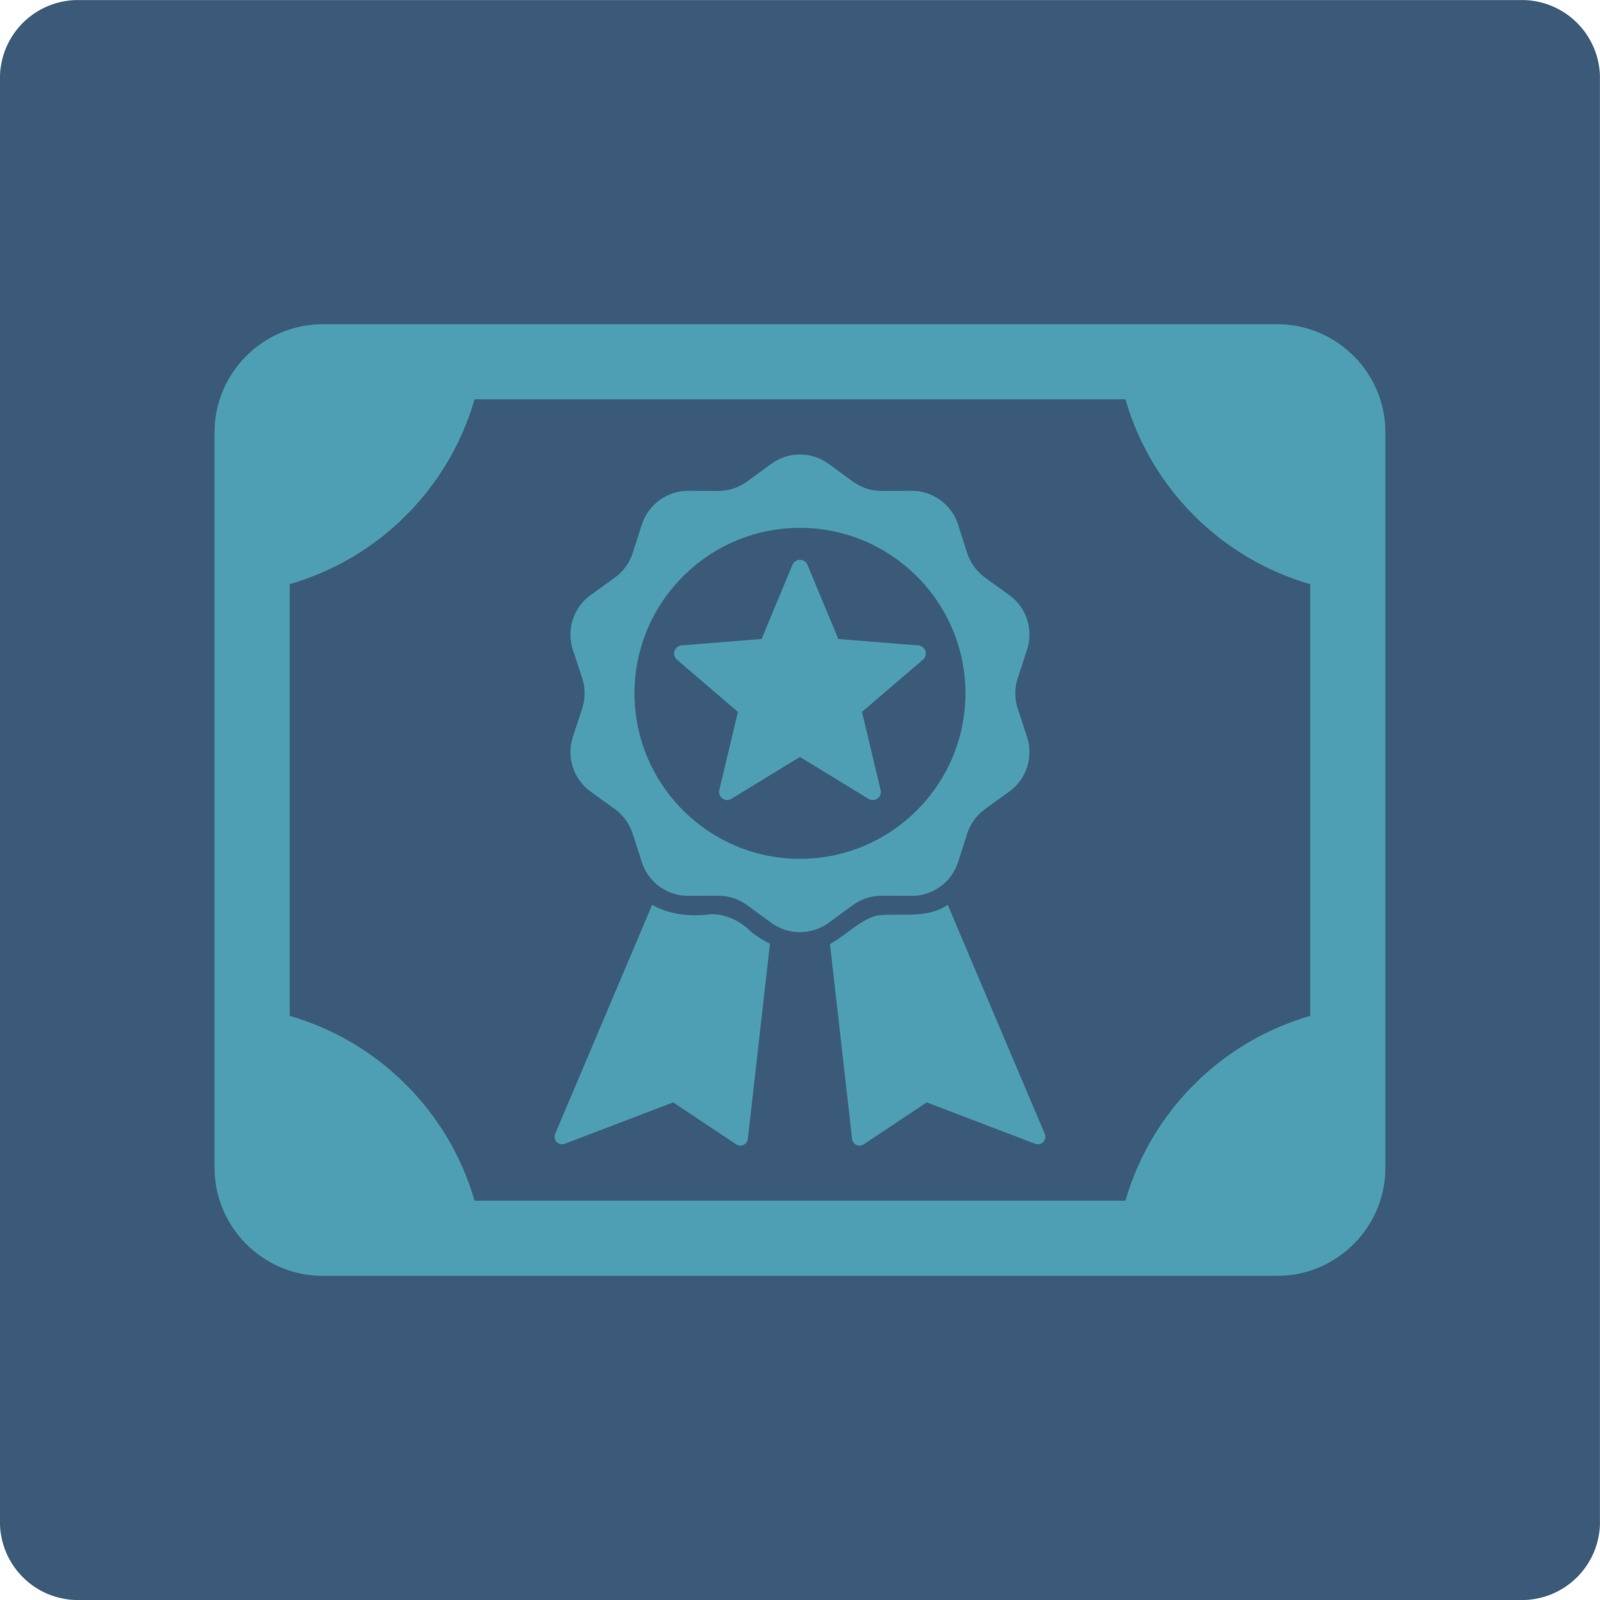 Certificate icon. Vector style is cyan and blue colors, flat rounded square button on a white background.